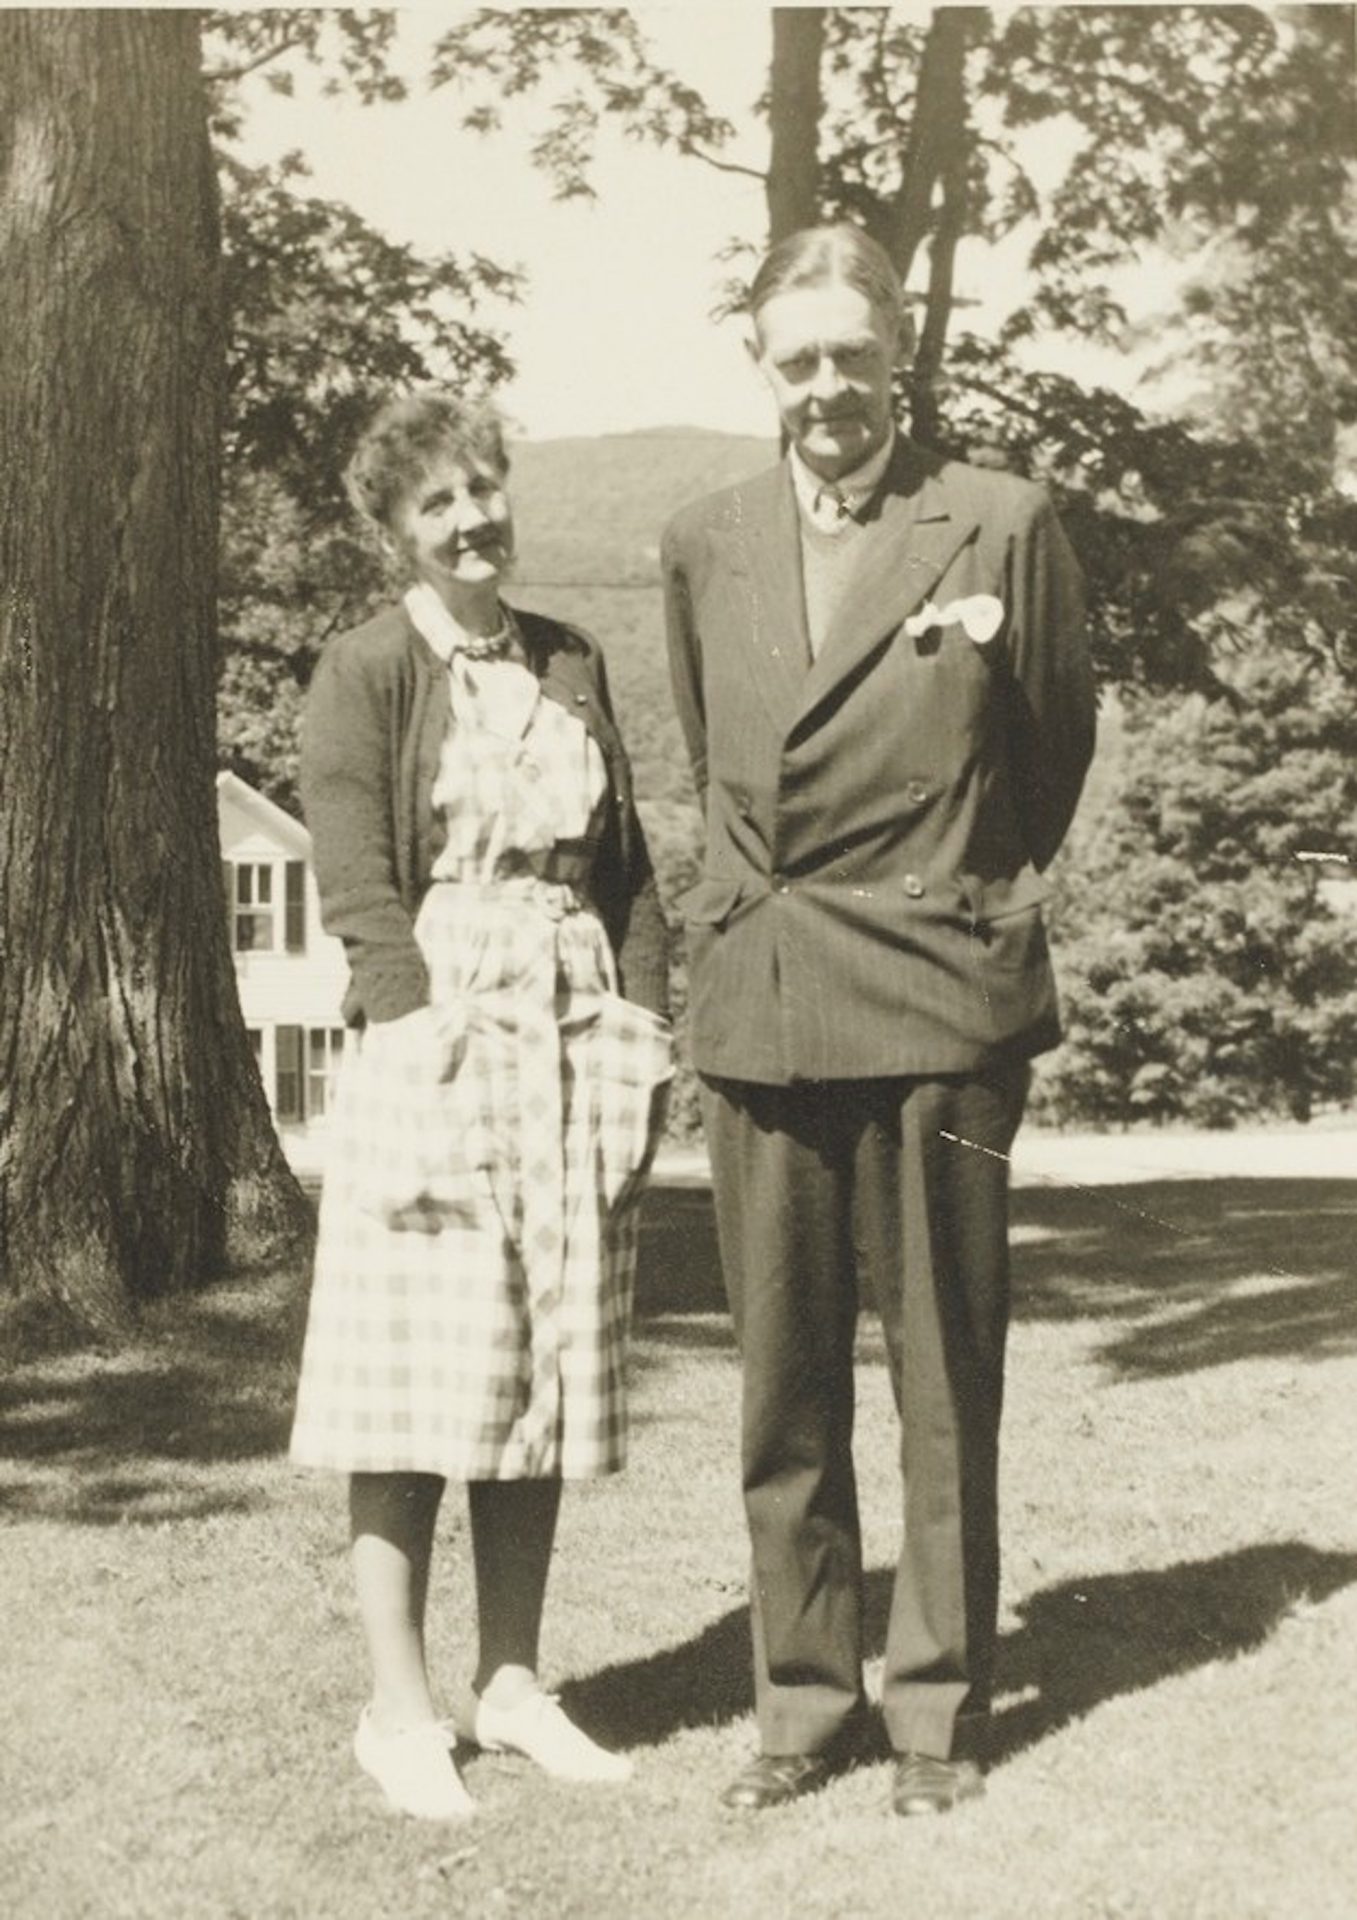 T.S. Eliot poses for a photo with Emily Hale in Dorset, Vermont, during the summer of 1946.